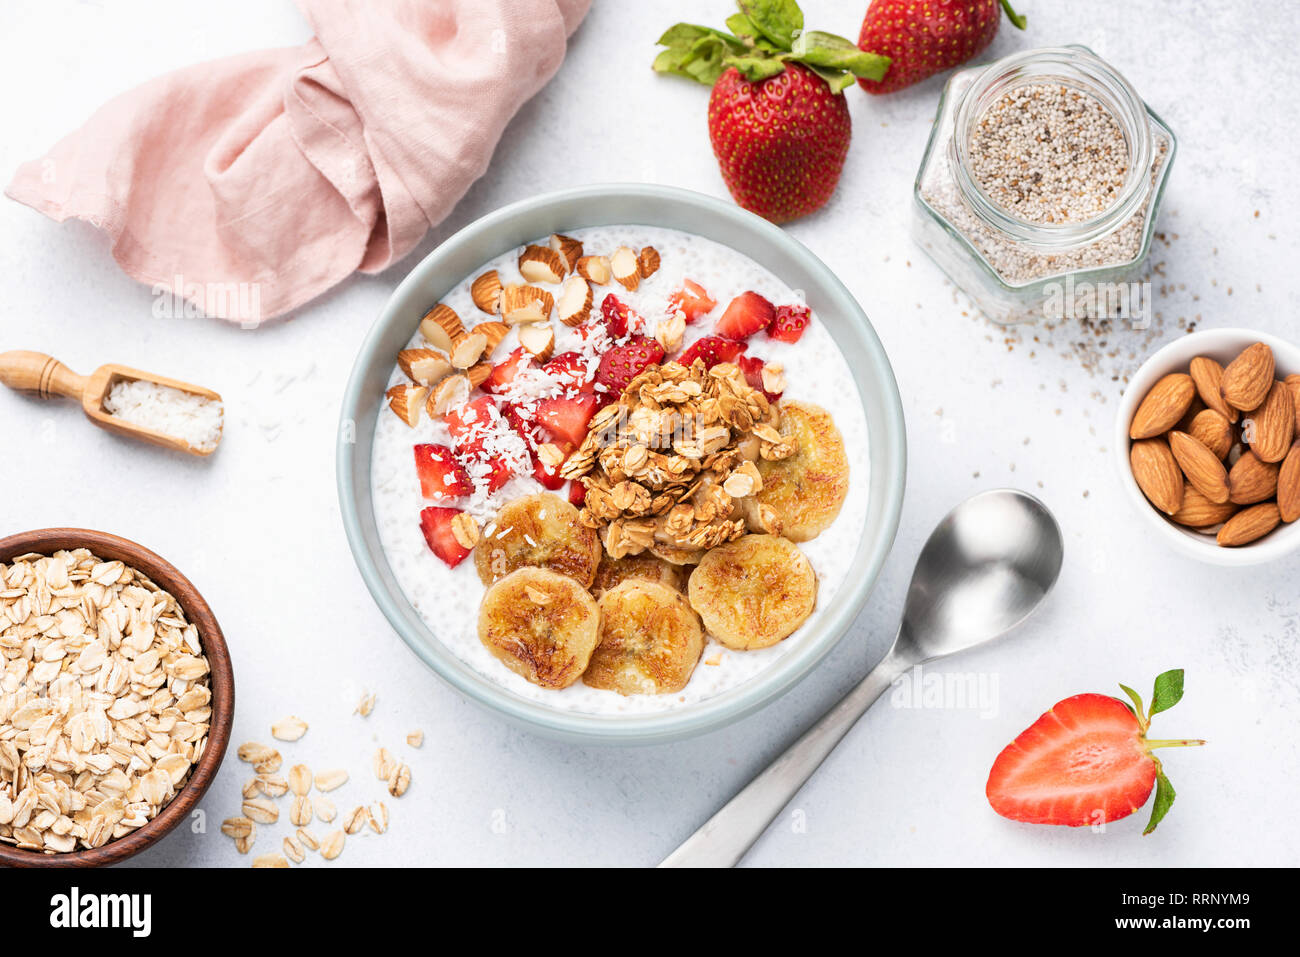 Yogurt bowl with superfoods, fruits and granola. Vegan or vegeterian breakfast, snack. Concept of clean eating, dieting, healthy eating and weight los Stock Photo